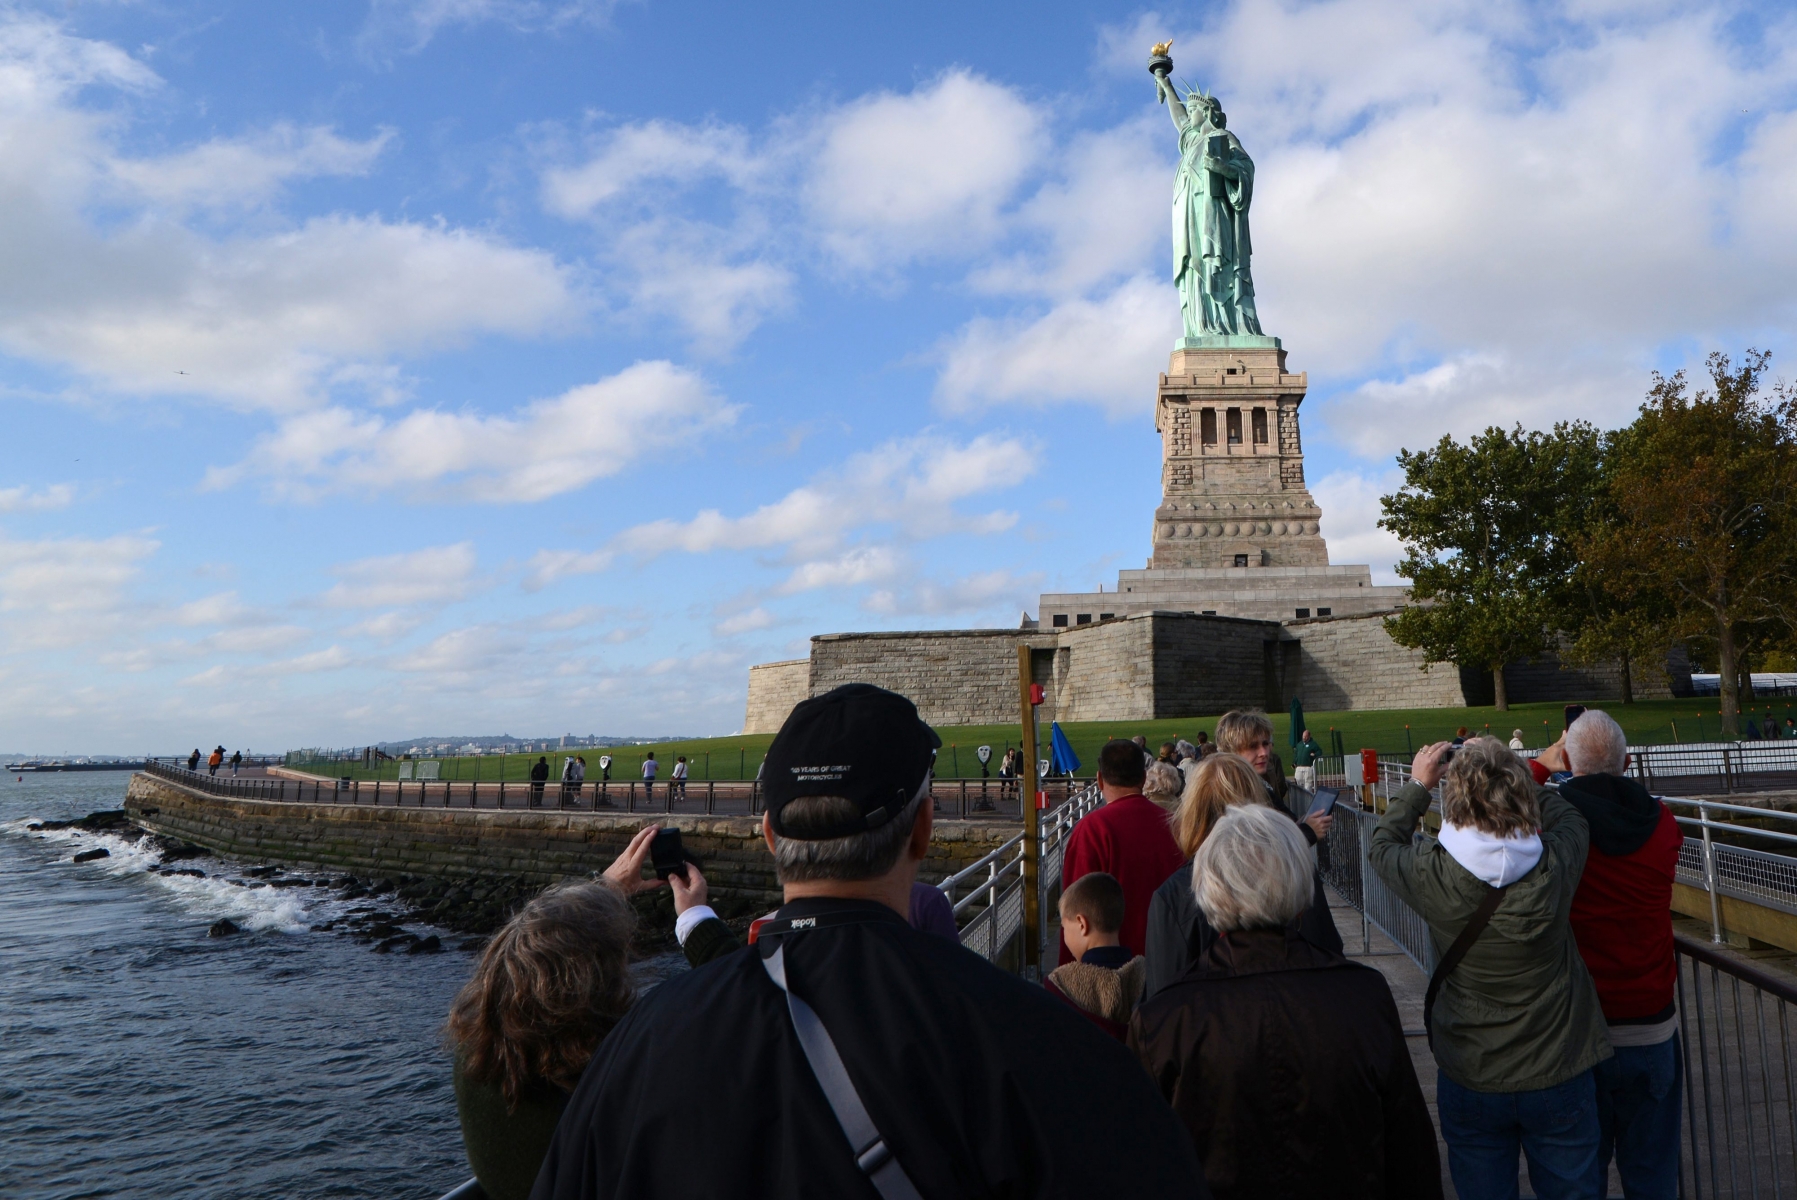 epa03908657 Tourists take pictures of the reopened Statue of Liberty, on Liberty Island in New York City, New York, USA, 13 October 2013. Four US states will pay the federal government to keep their major tourism attractions open for visitors. Arizona, South Dakota, Utah and New York state have agreed to pay the National Park Service to reopen locations that have been closed since the partial US government shutdown commenced on 01 October.  EPA/PETER FOLEY USA STATUE OF LIBERTY REOPENS